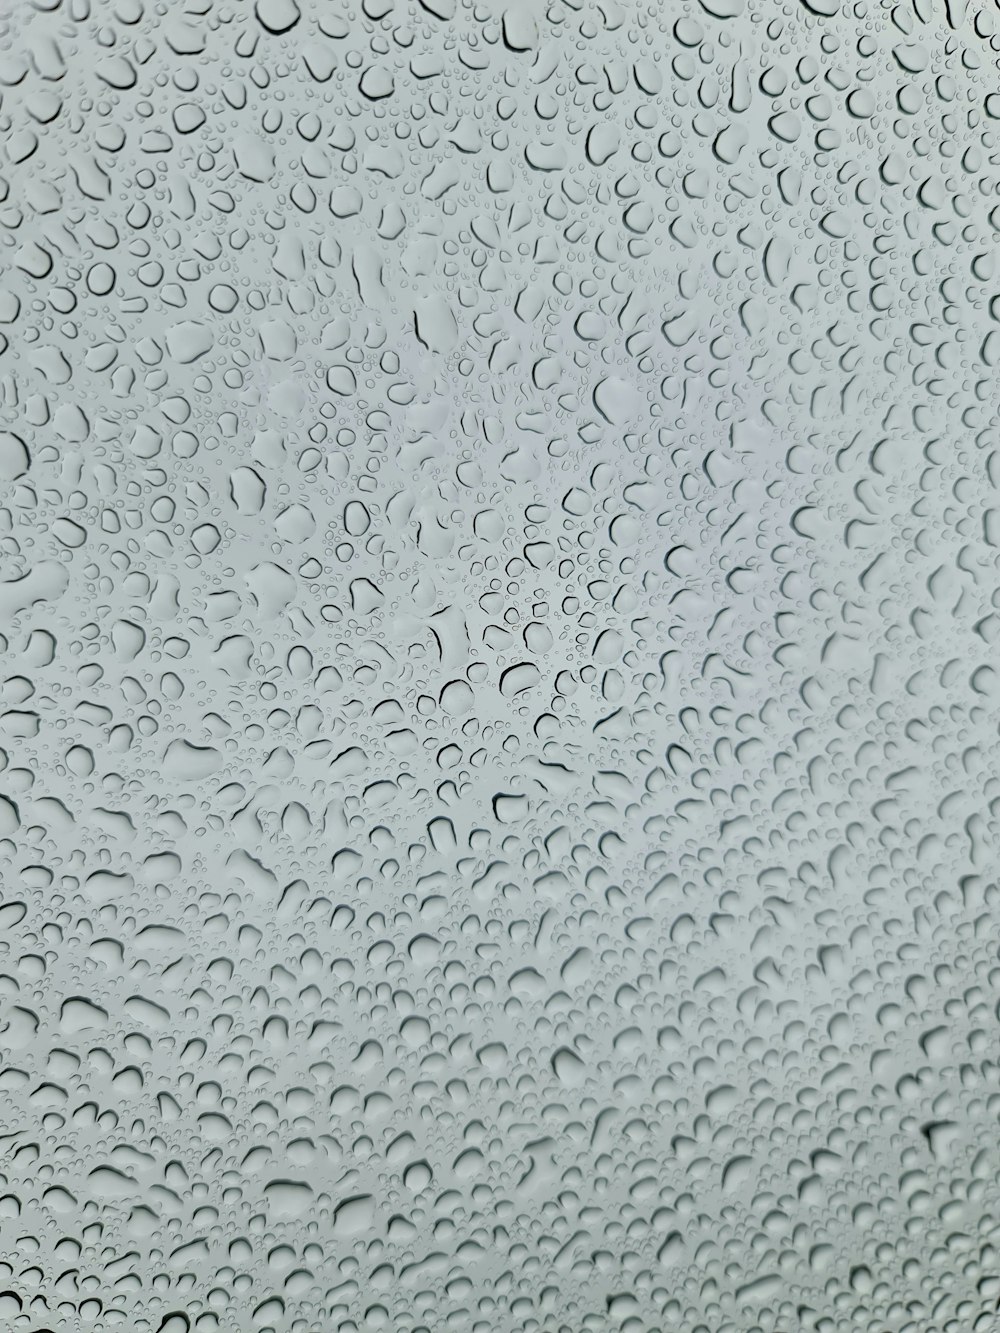 a close up of a window with rain drops on it